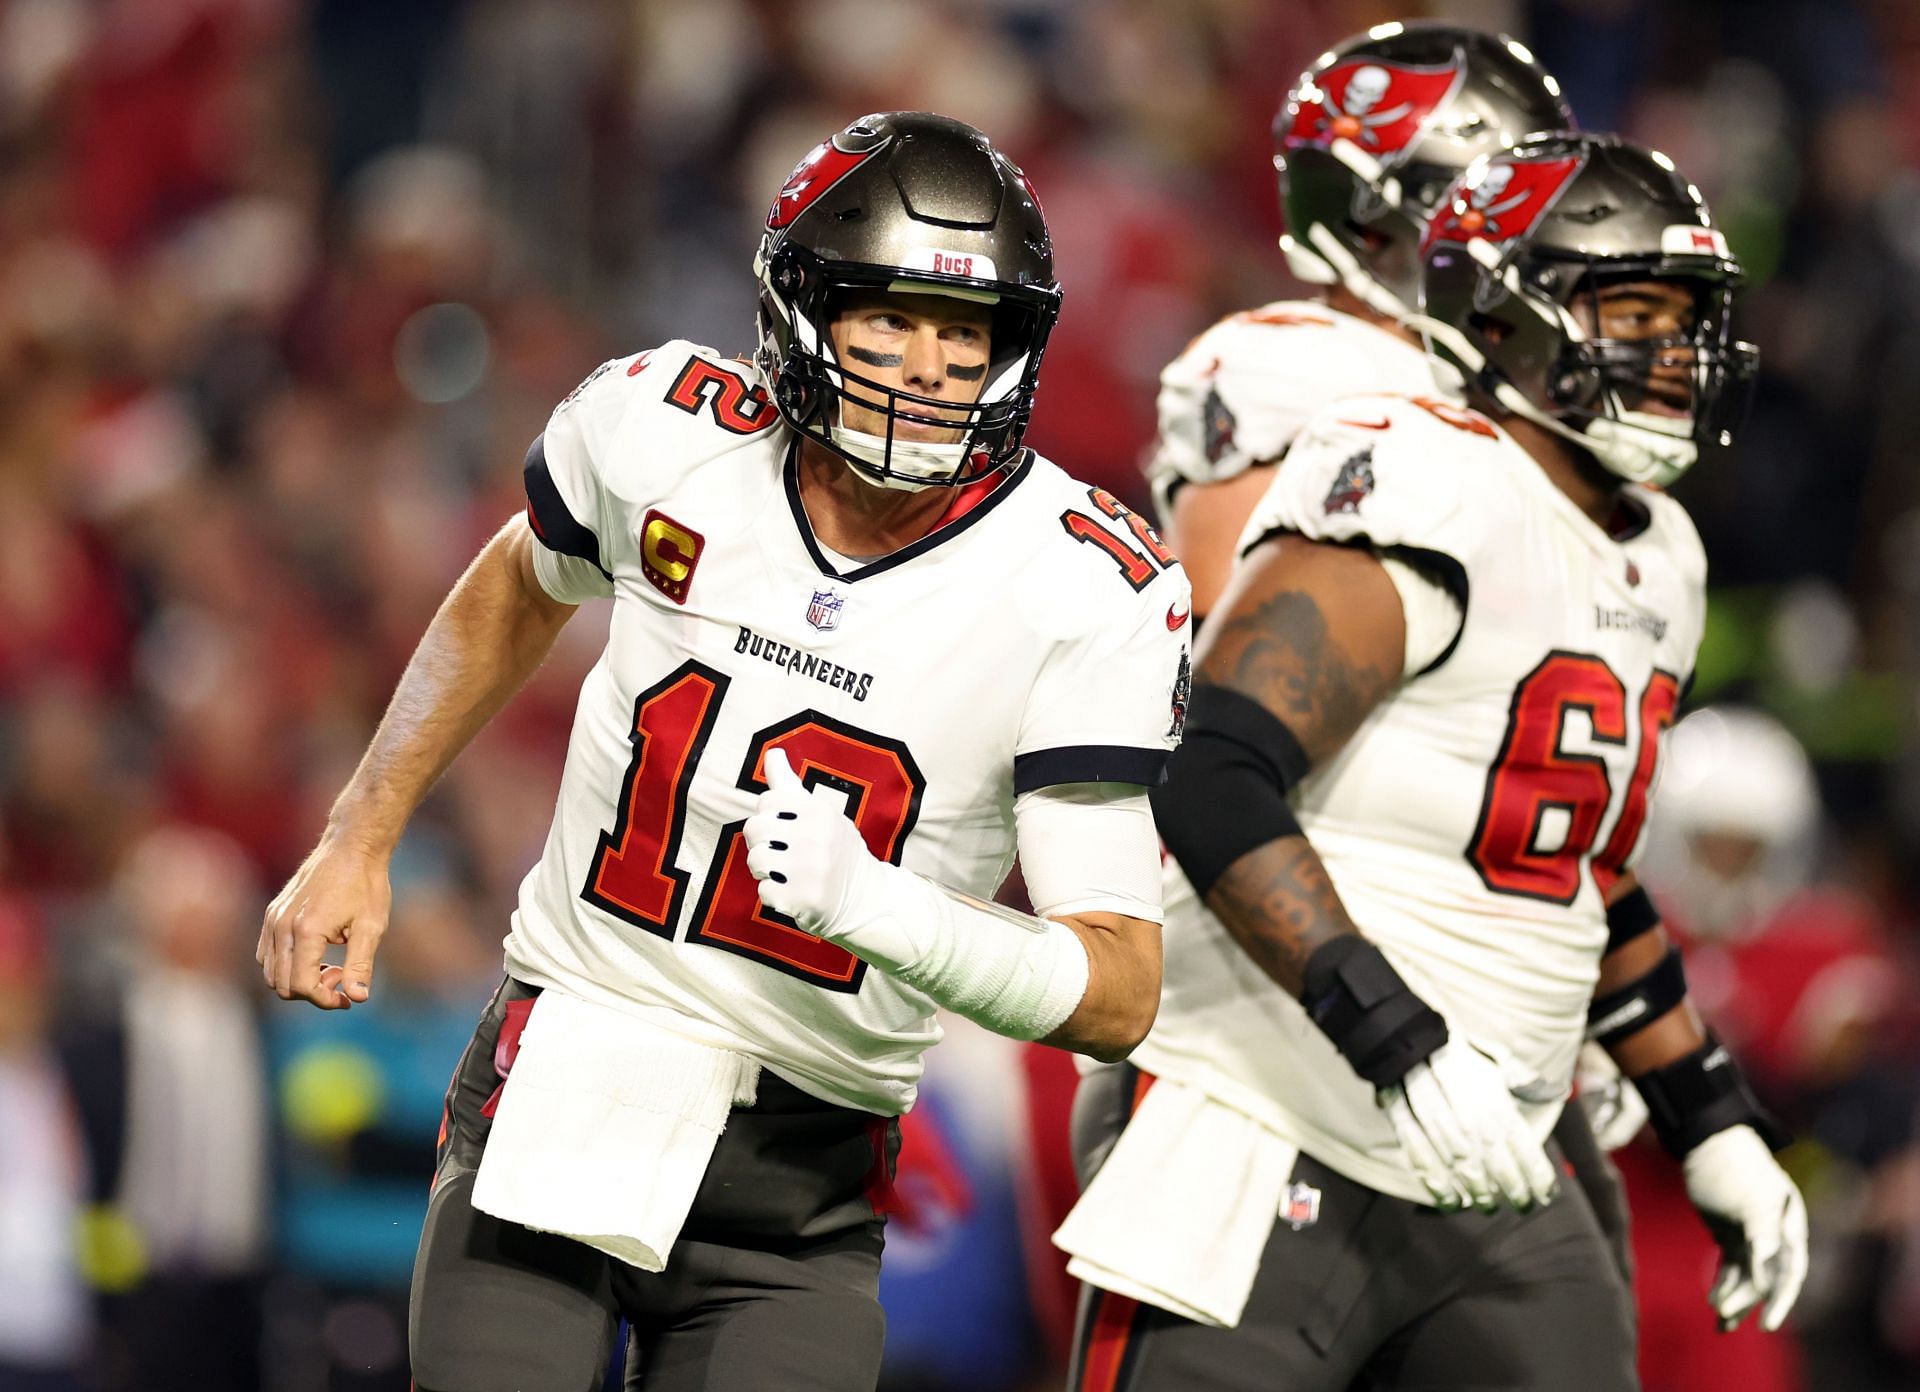 Entering Week 16 Bucs heavy favorites to clinch playoff spot